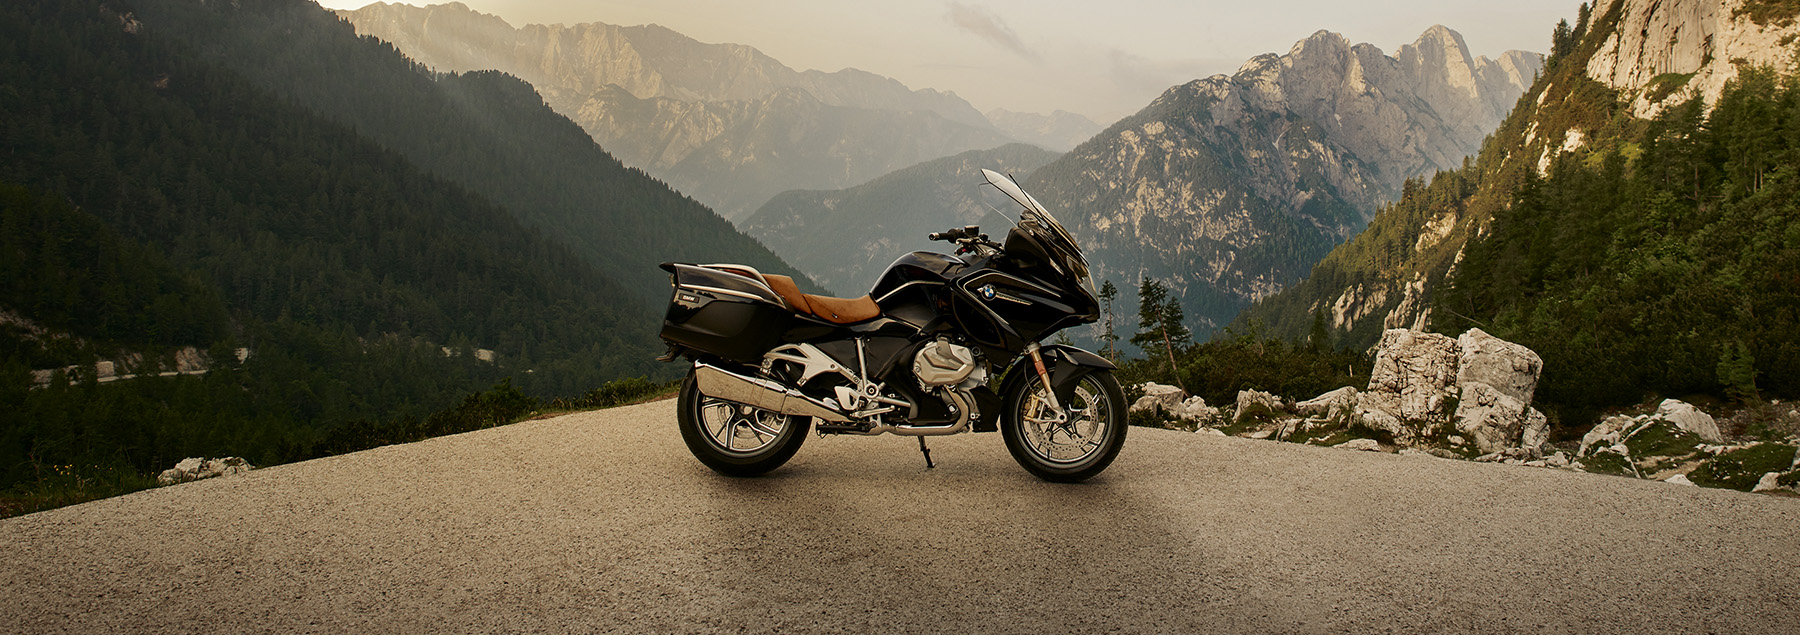 A BMW Motorcycle standing near mountains in Southern California.